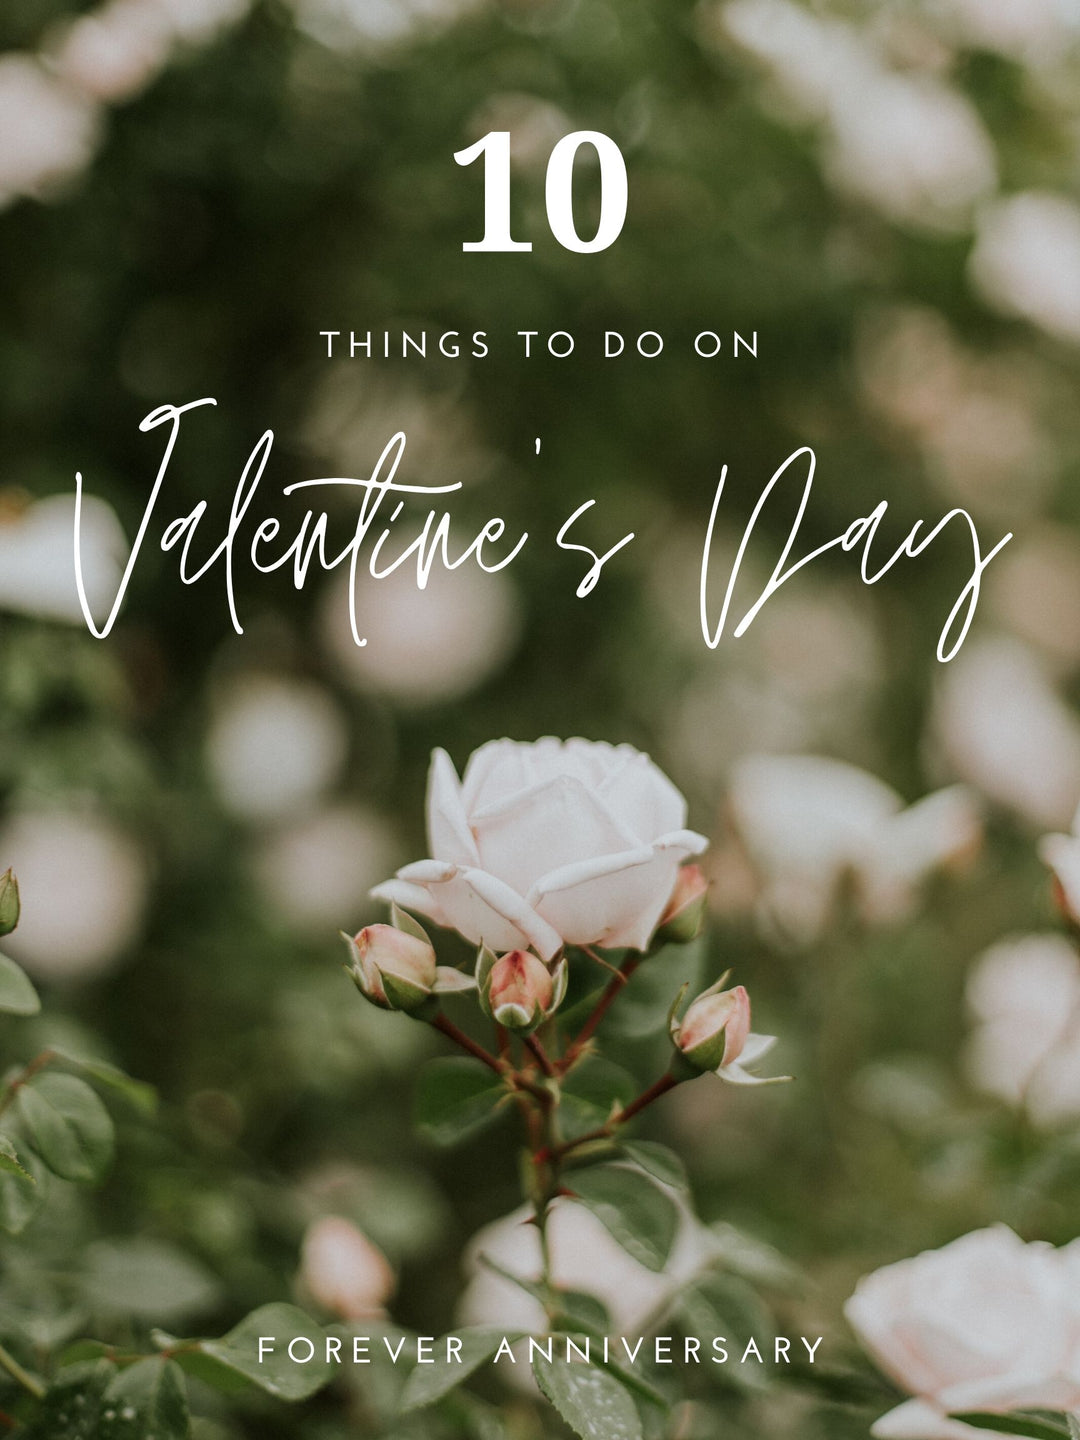 Things to Do on Valentine's Day